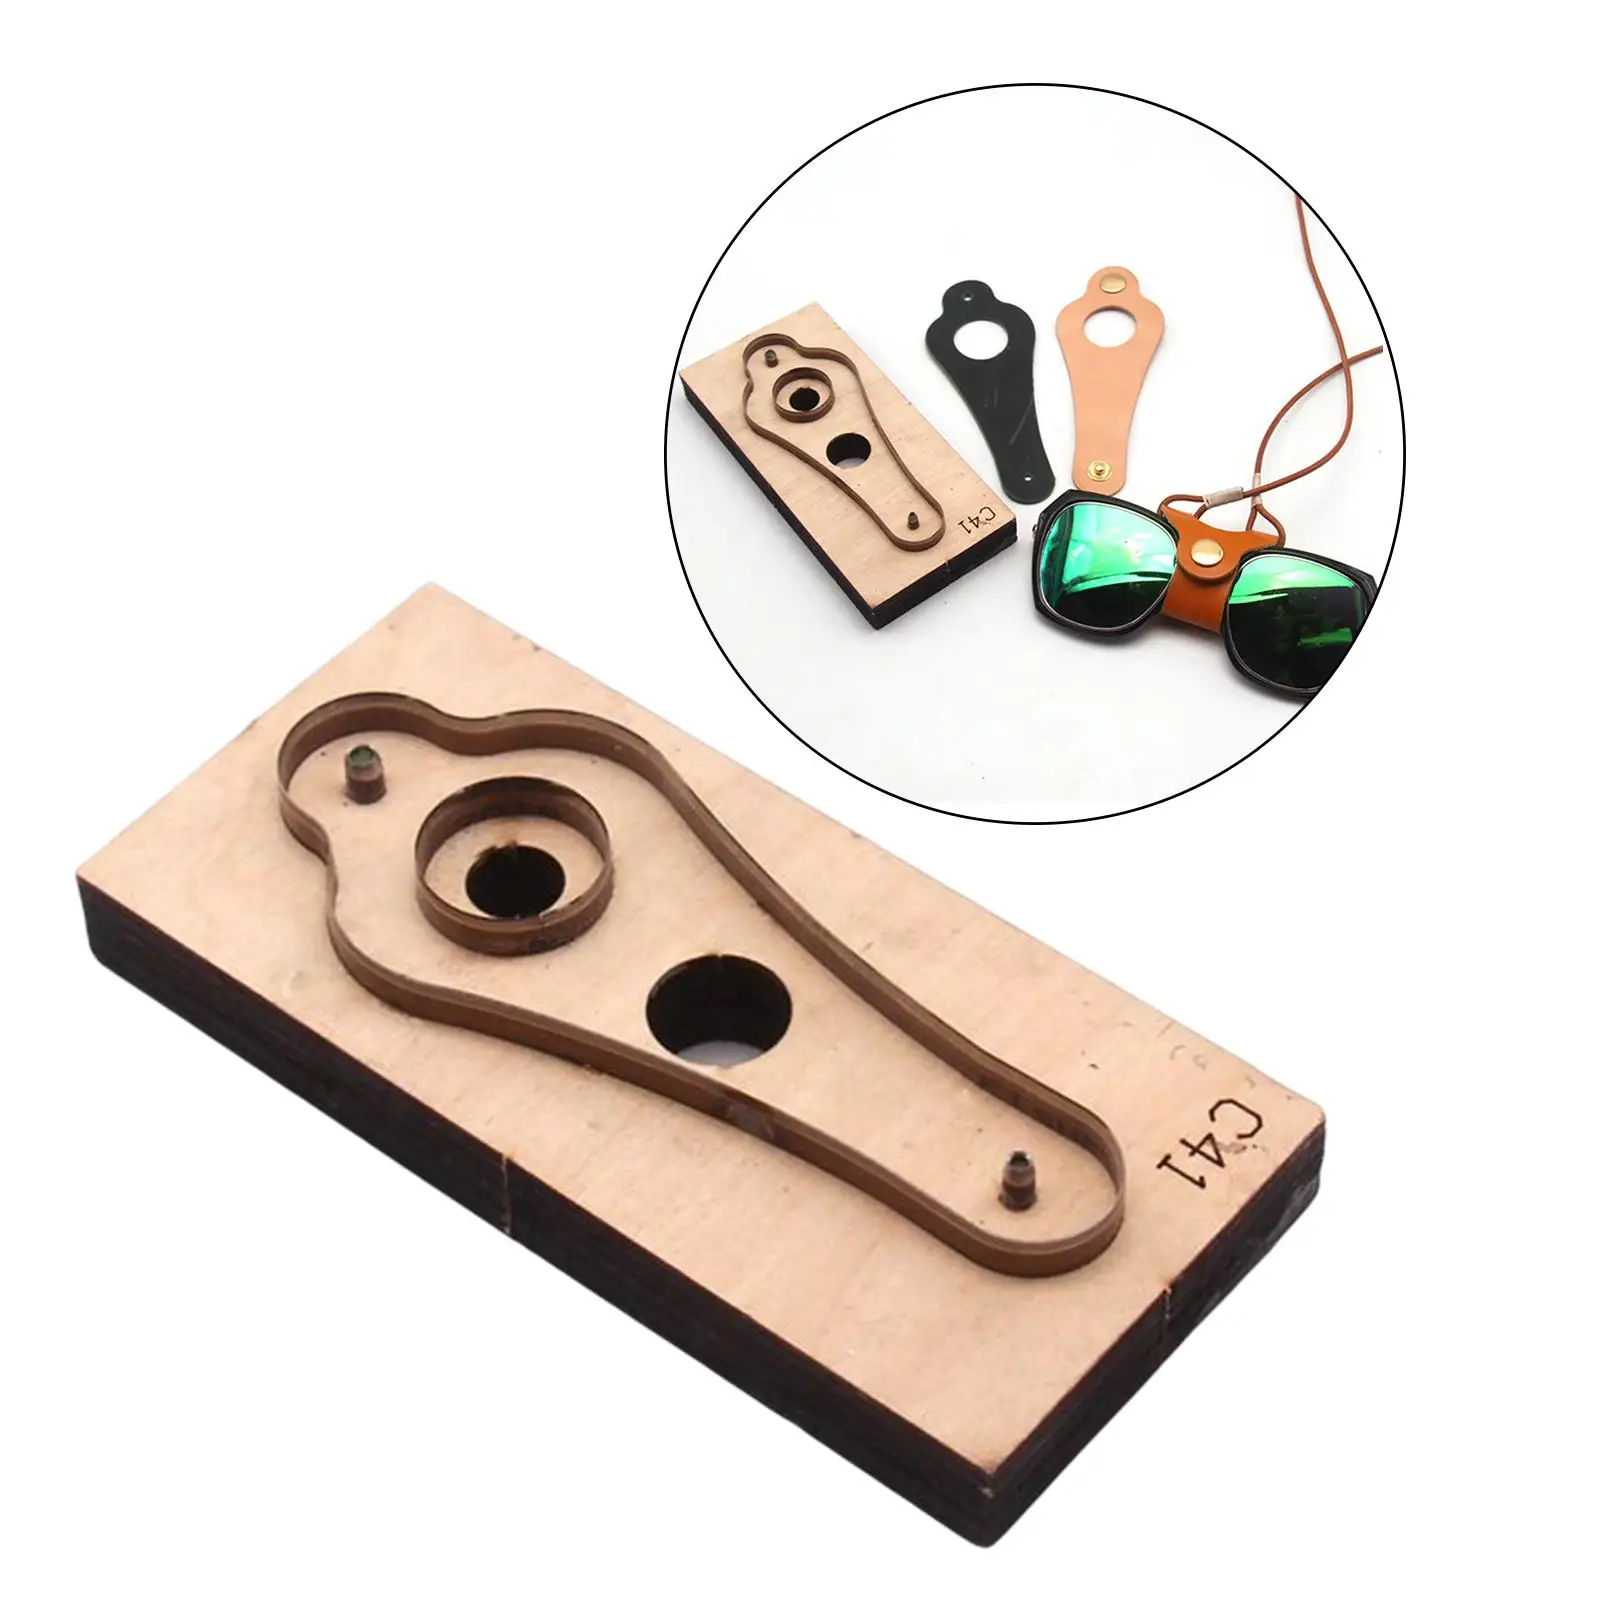 PU Leather Craft Cutting Die Mold Punching Tool Leathercrafts DIY Glasses Lanyard Buckle Hand Cutter Decorations Sharp for Home